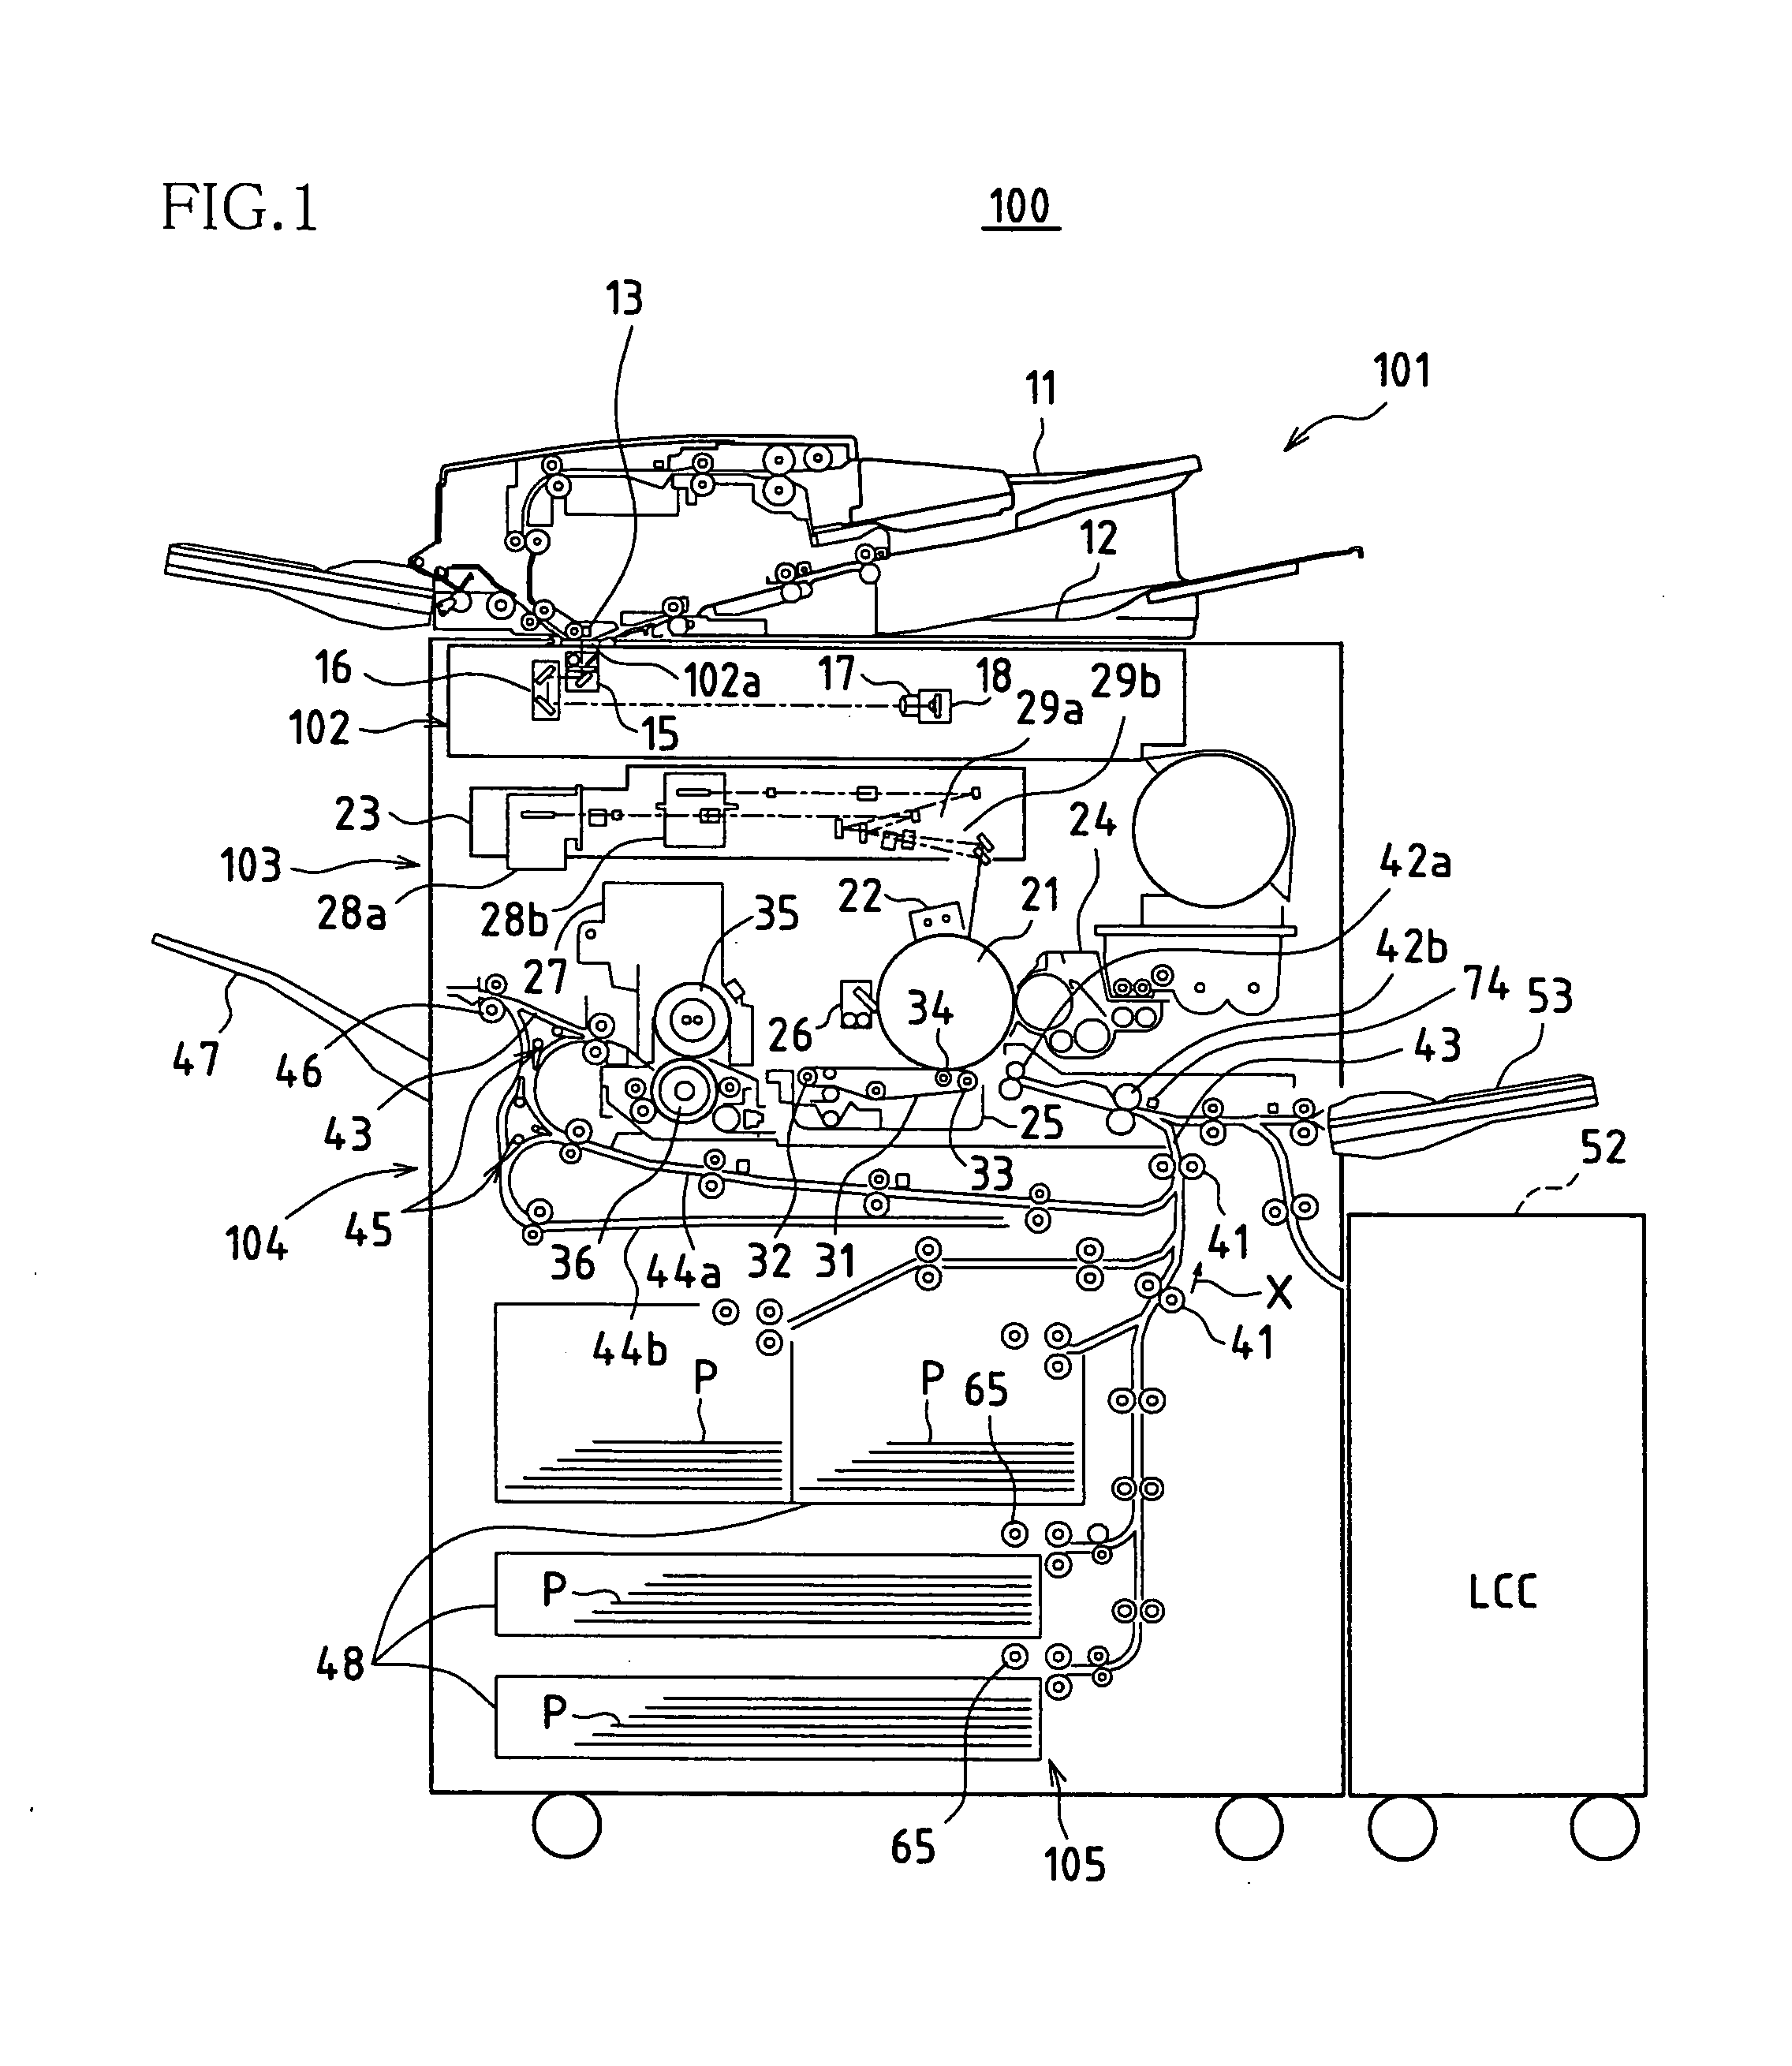 Printing apparatus and method for controlling the same